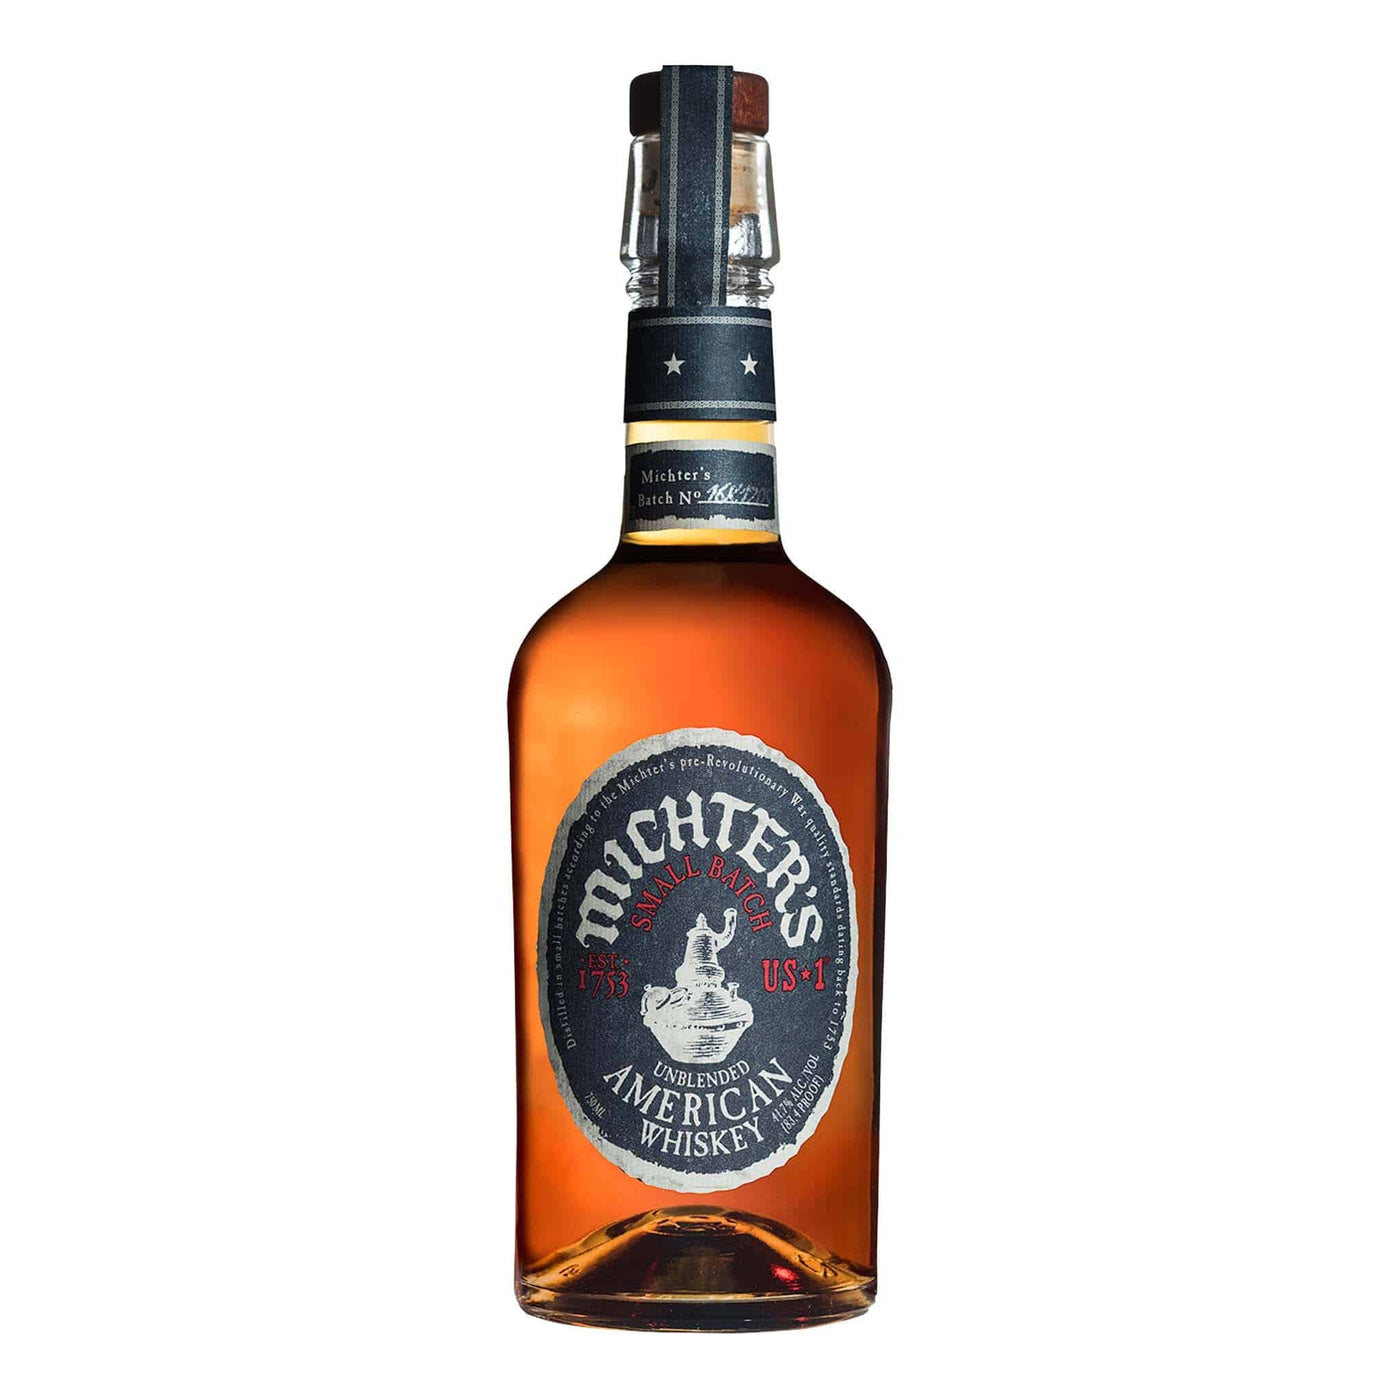 Michters U.S. Number 1 American Whiskey